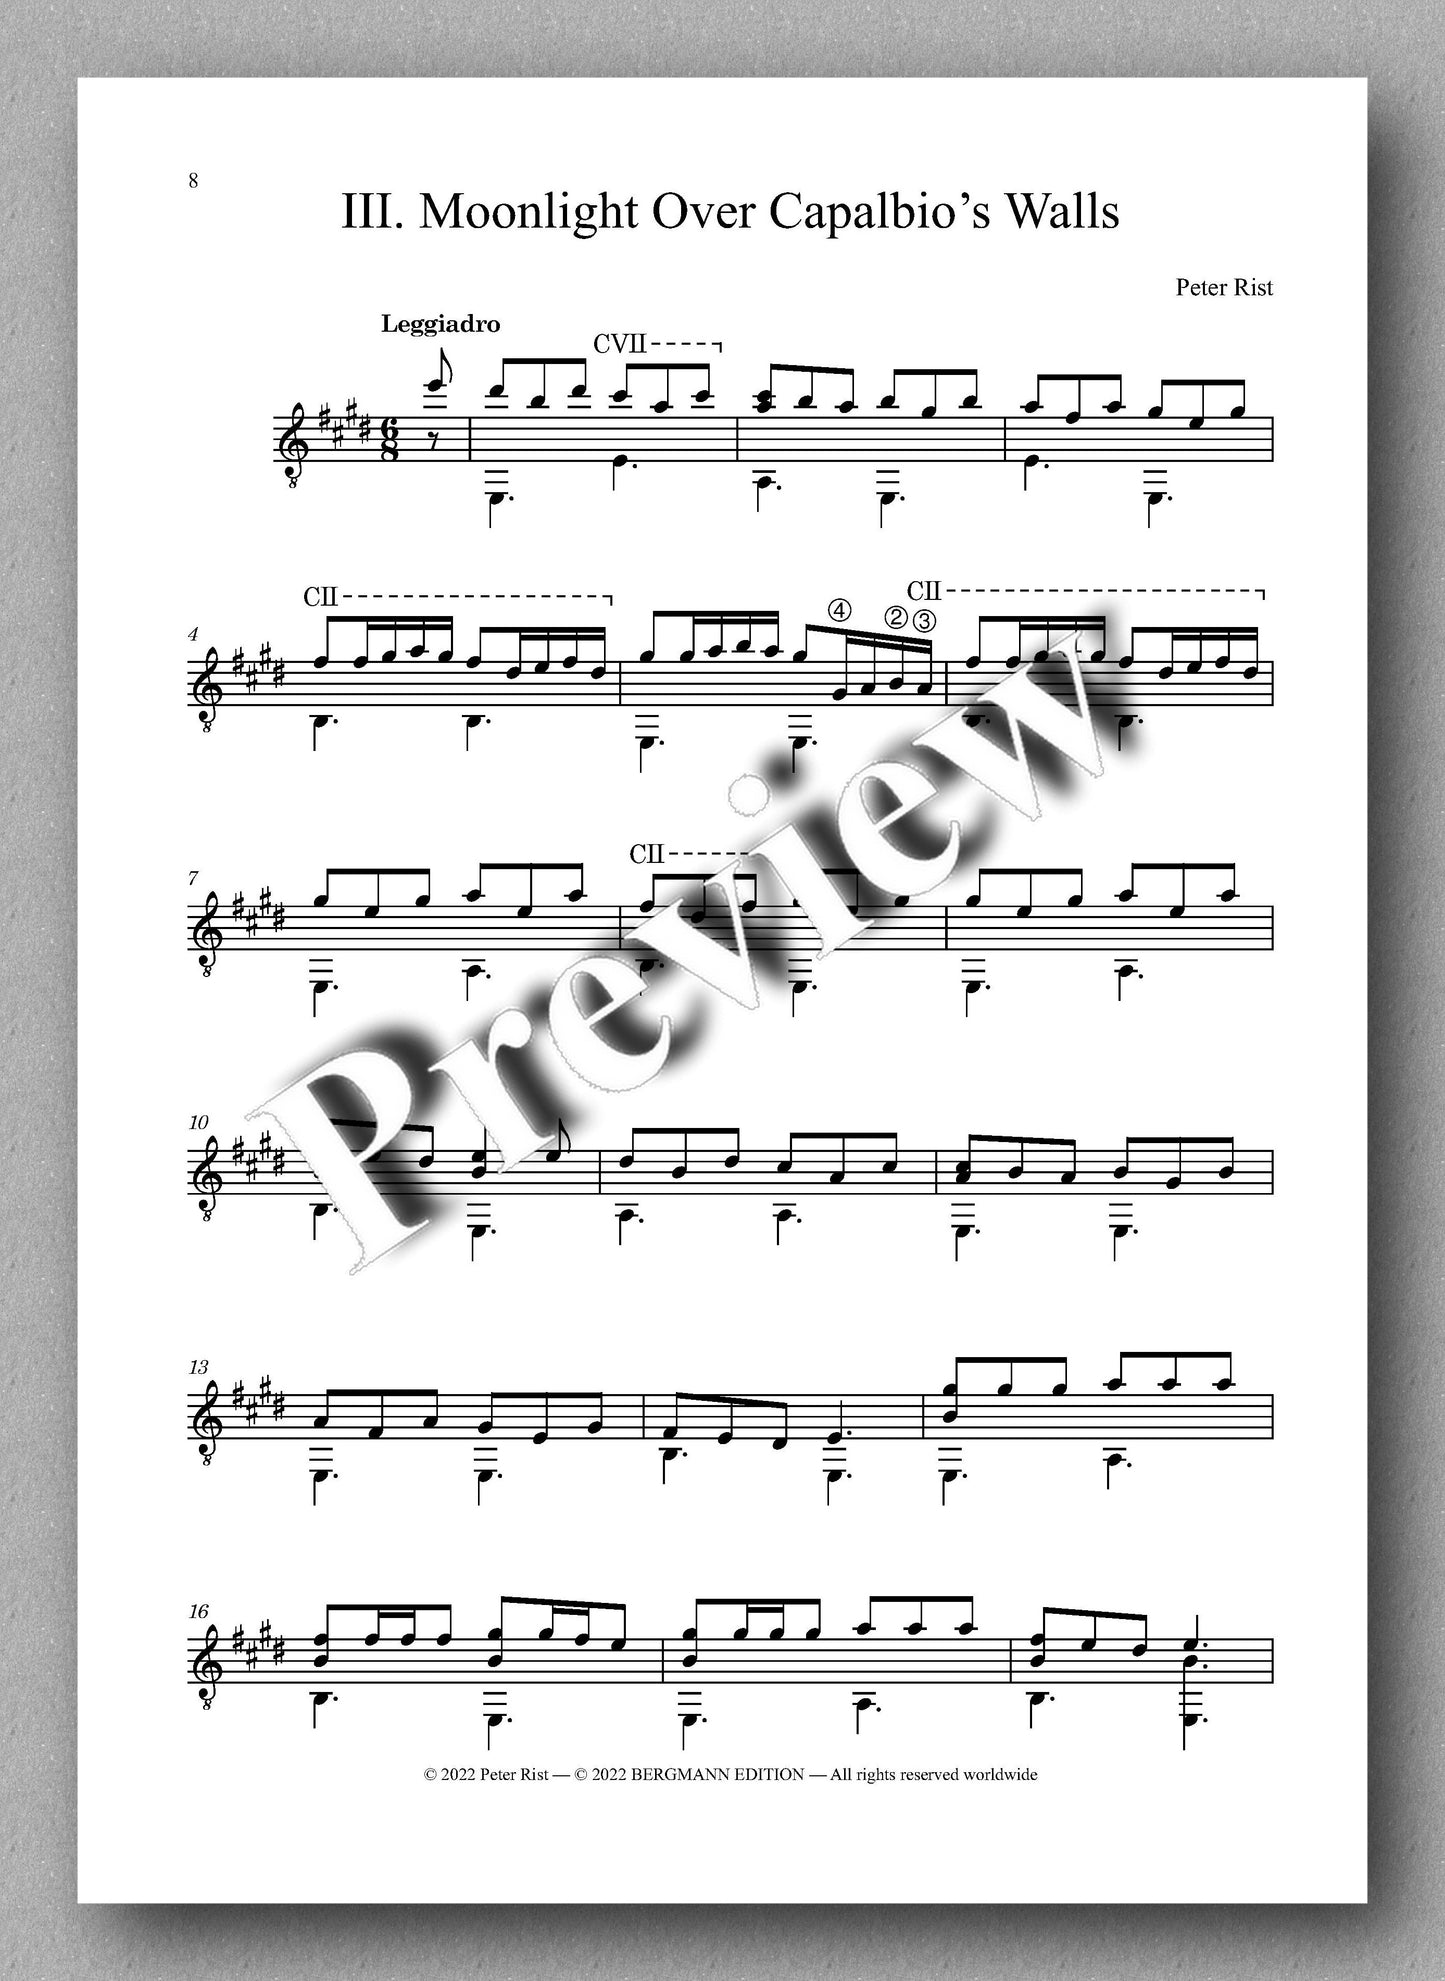 Capalbio by Peter Rist - preview of the music score 2